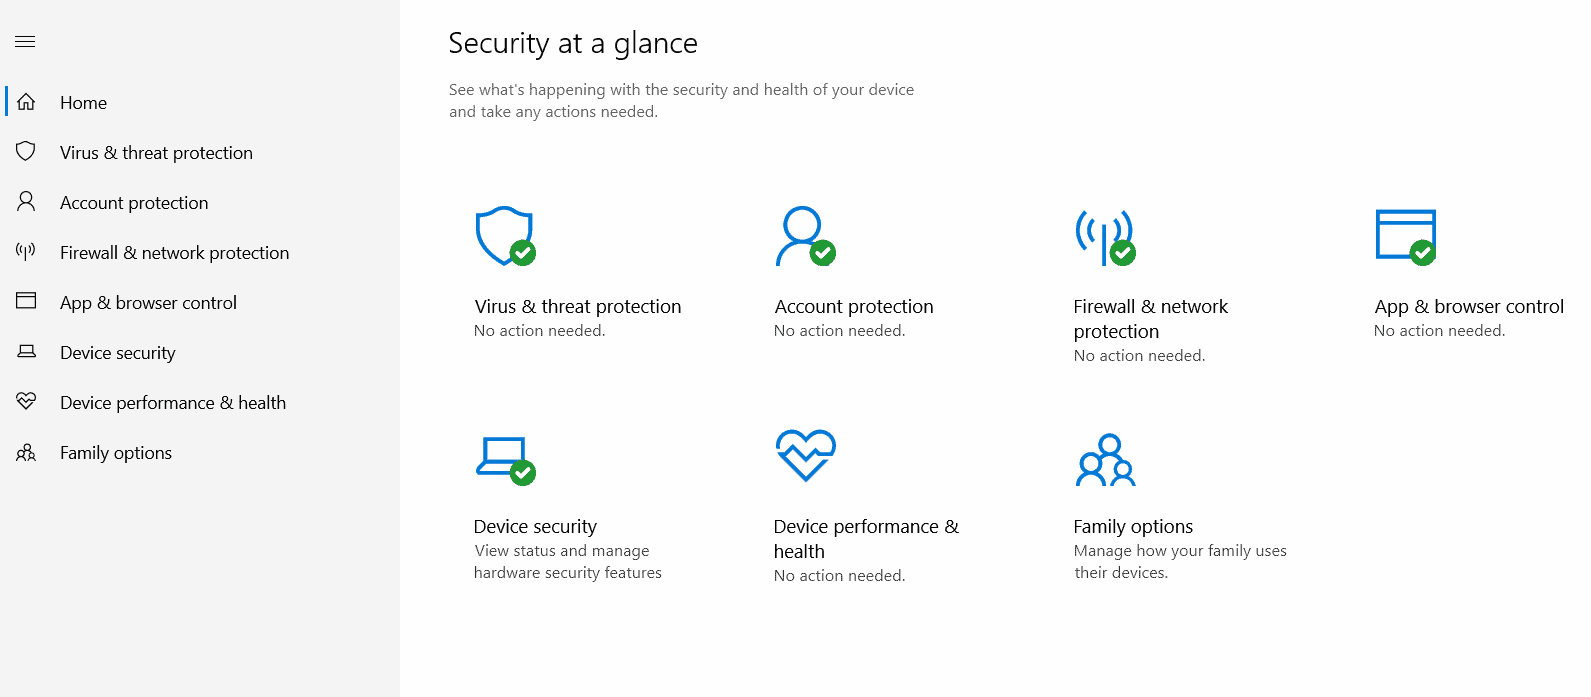 Is Microsoft Defender Good Enough Protection?